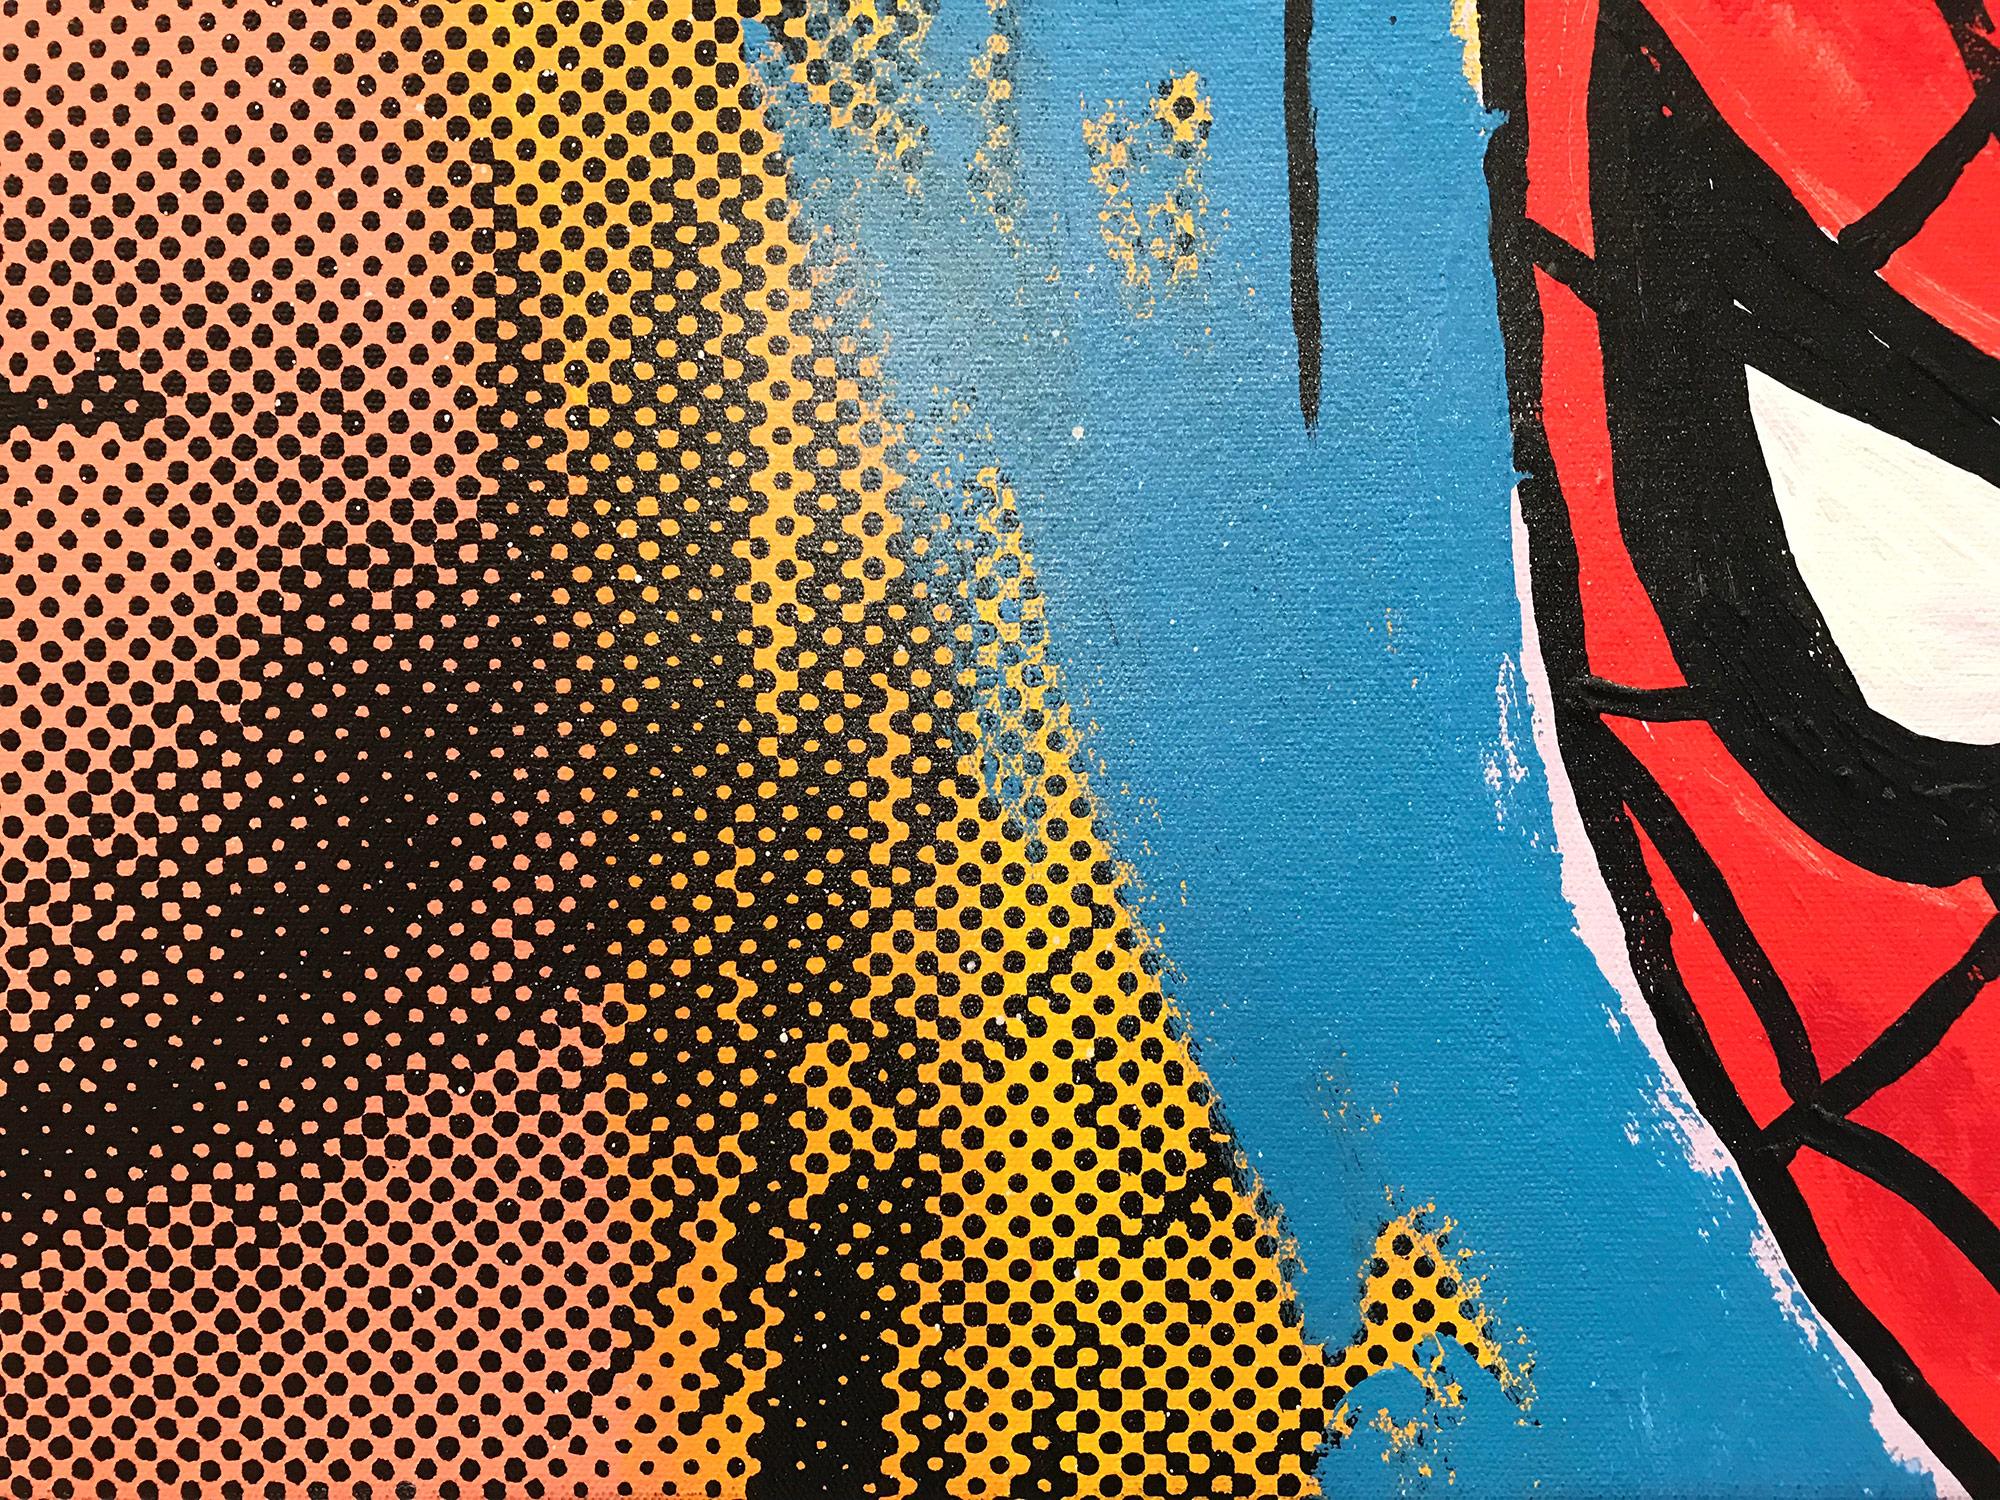 A pop piece depicting Spider-Man juxtaposed with Kurt Cobain. With impasto painting, silkscreening, and quick brushwork we are drawn to the movement, as the artist is able to engage his viewer with contrasting highlights and shadow. This piece is on